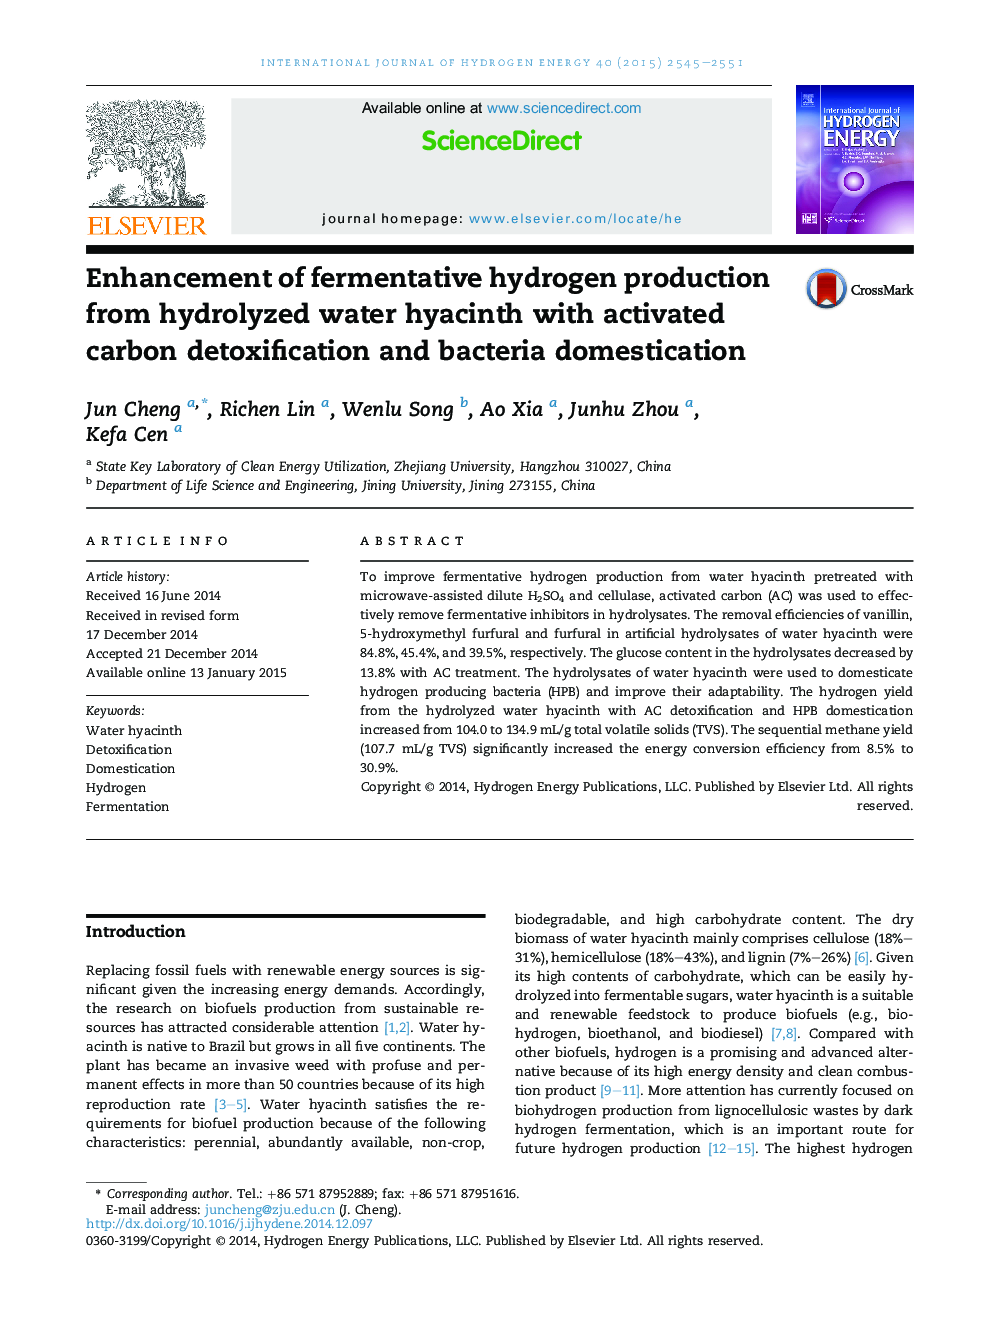 Enhancement of fermentative hydrogen production from hydrolyzed water hyacinth with activated carbon detoxification and bacteria domestication